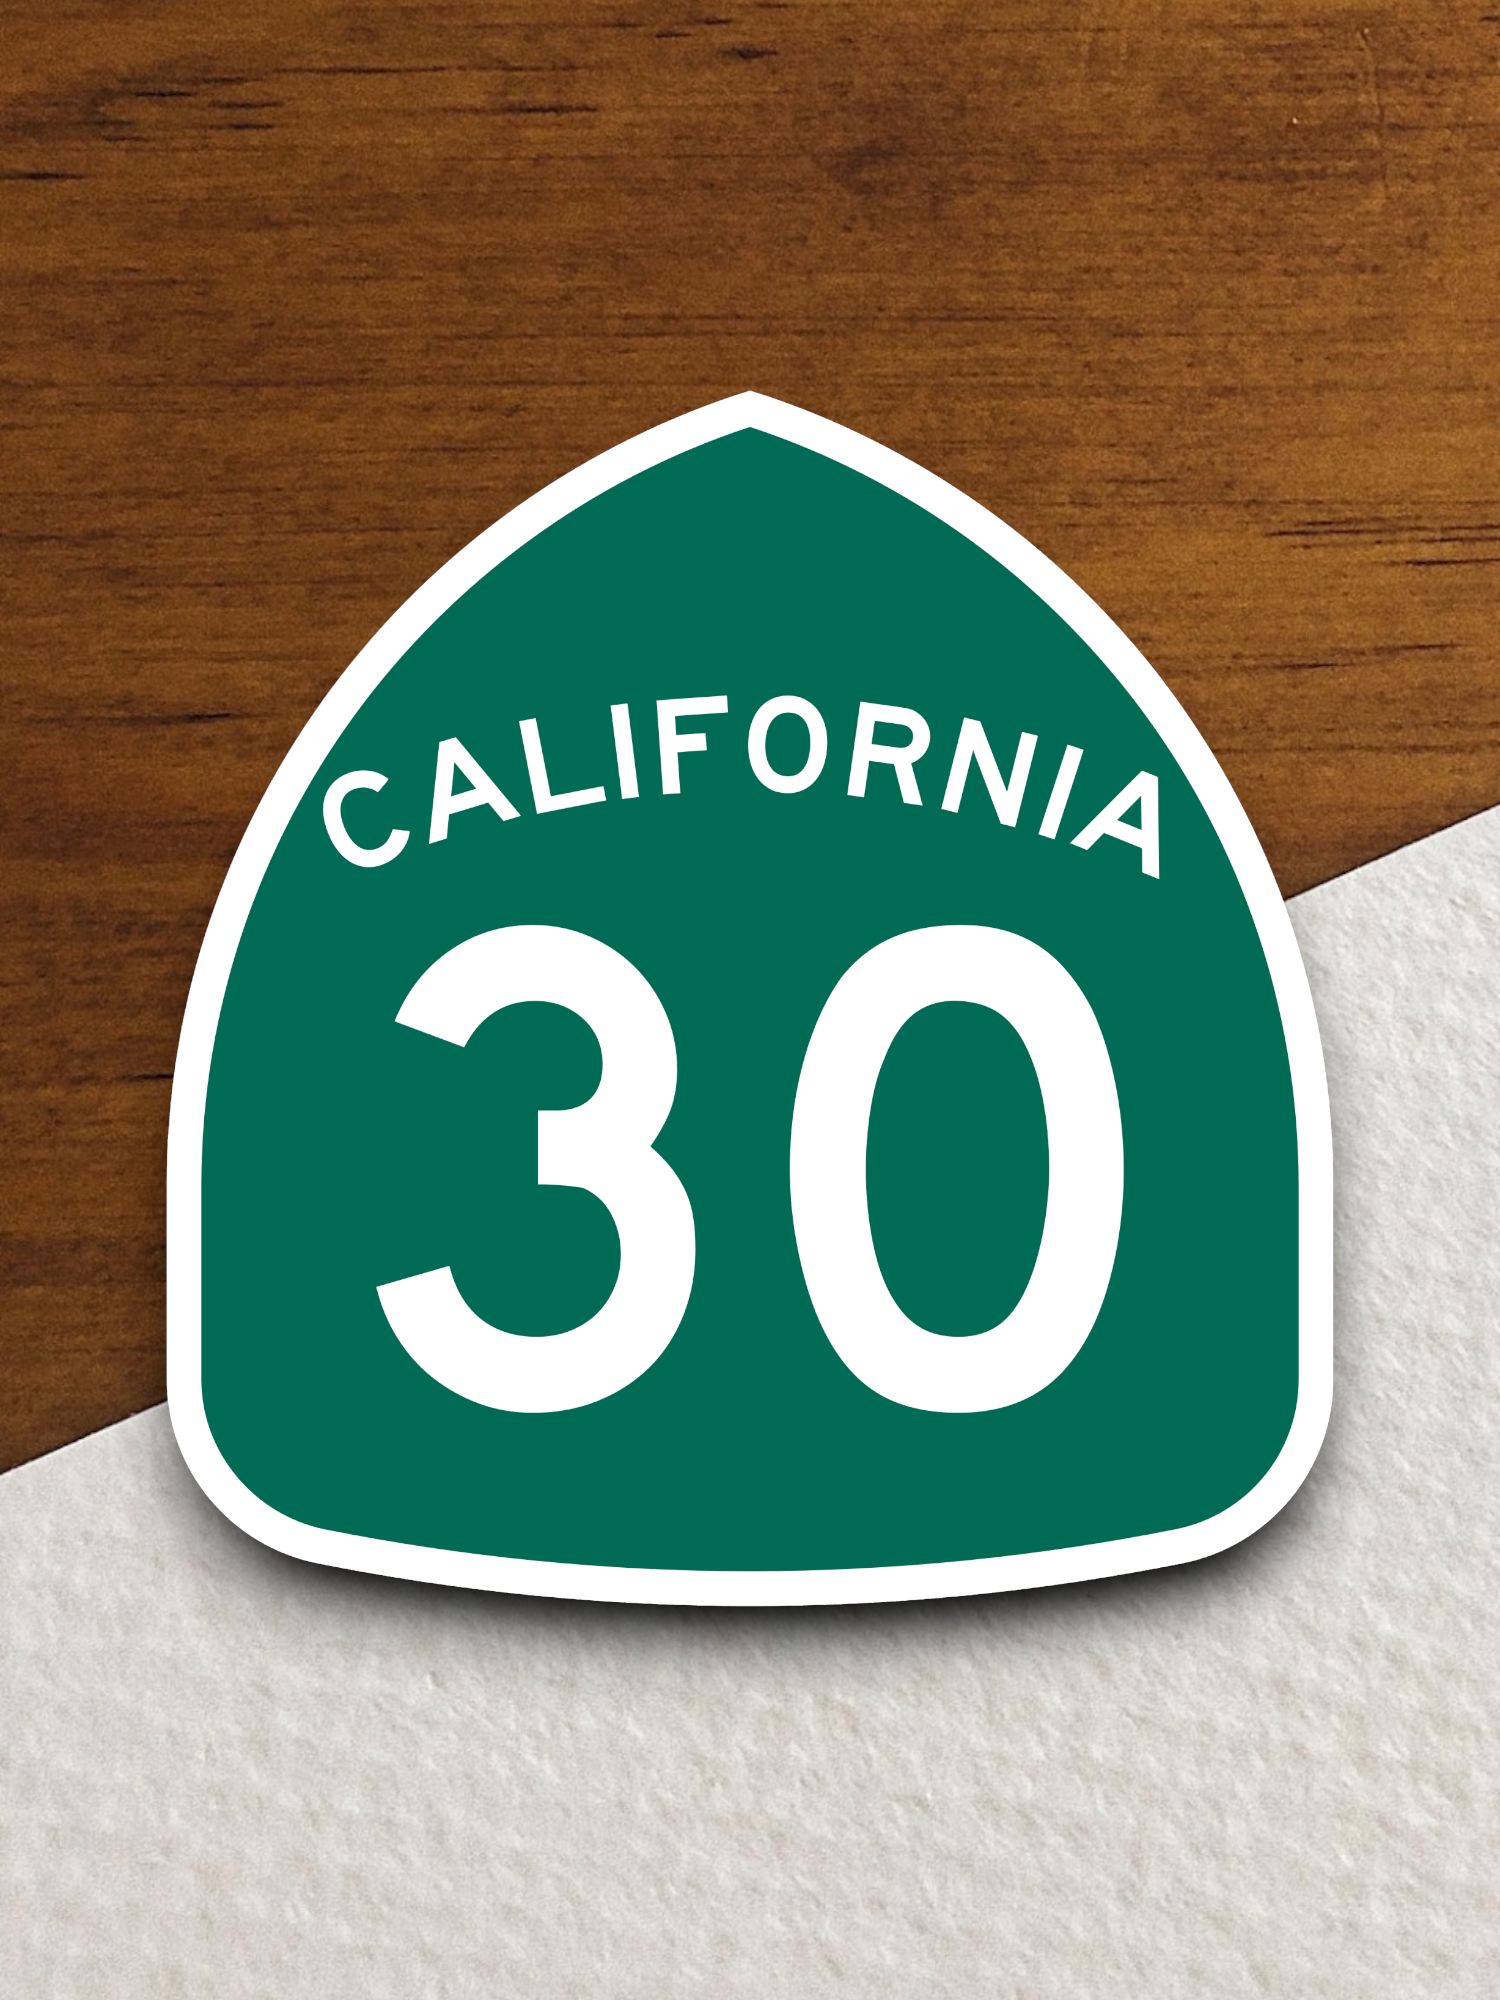 California State Route 30 Road Sign Sticker